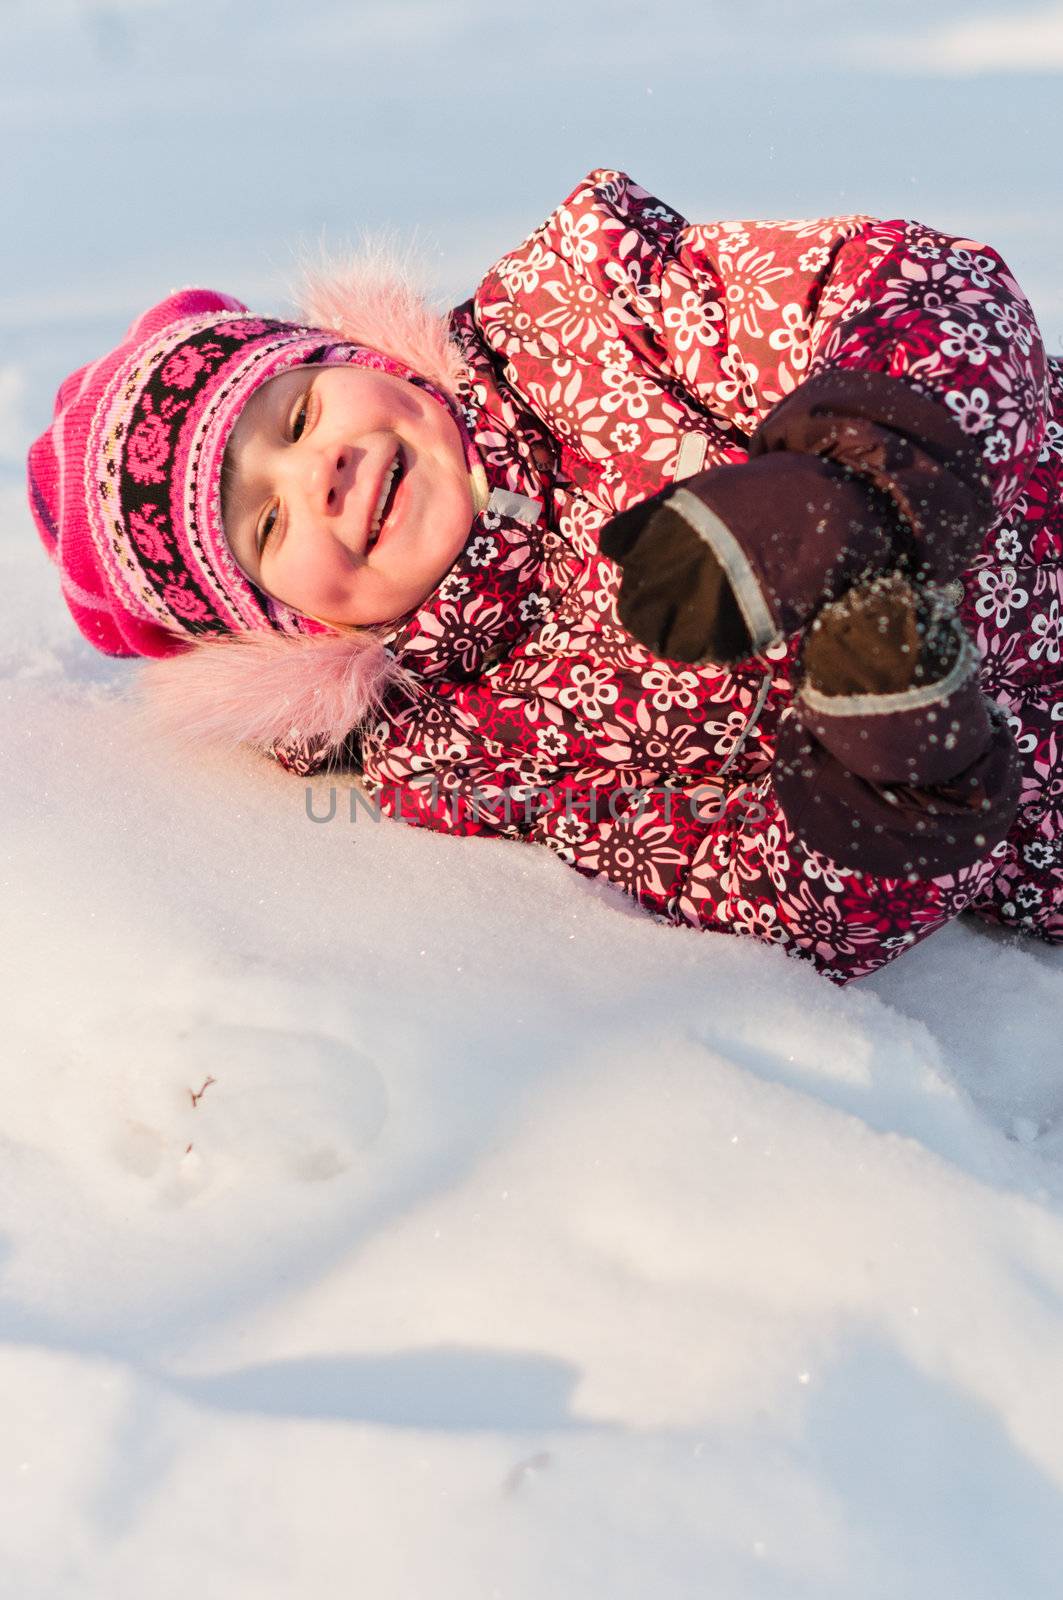 Baby lays on snow and laugh a lot